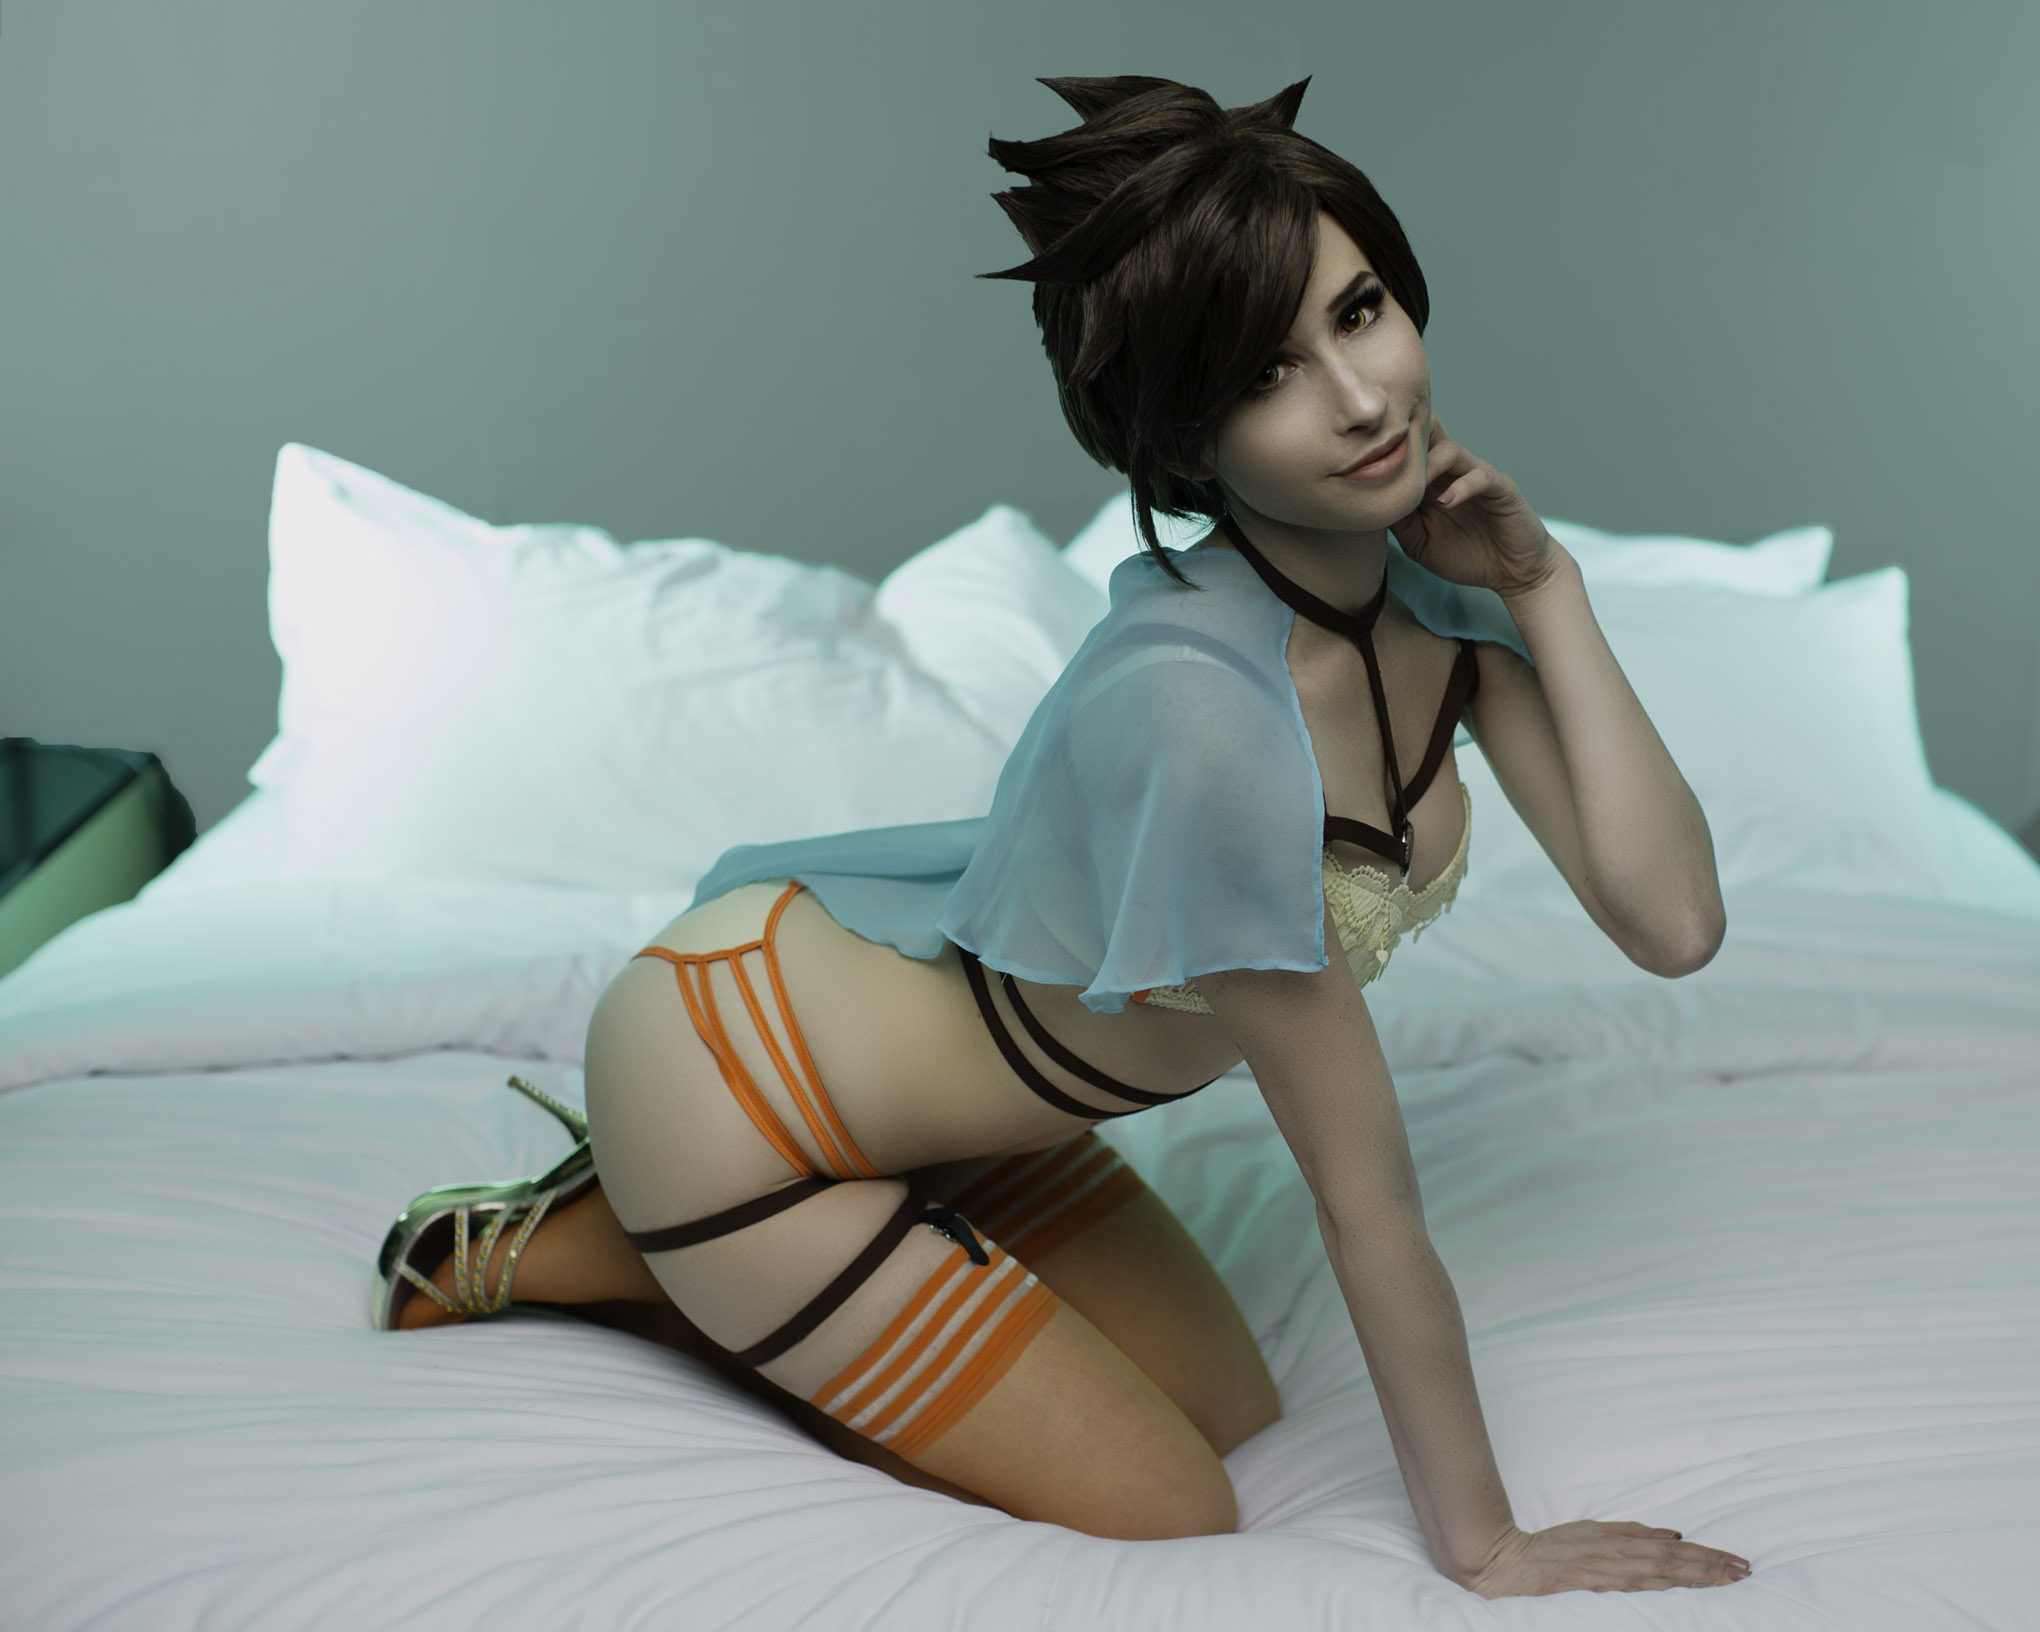 Overwatch Cosplays Just Keeps Getting Hotter (NSFW) - Gaming Central